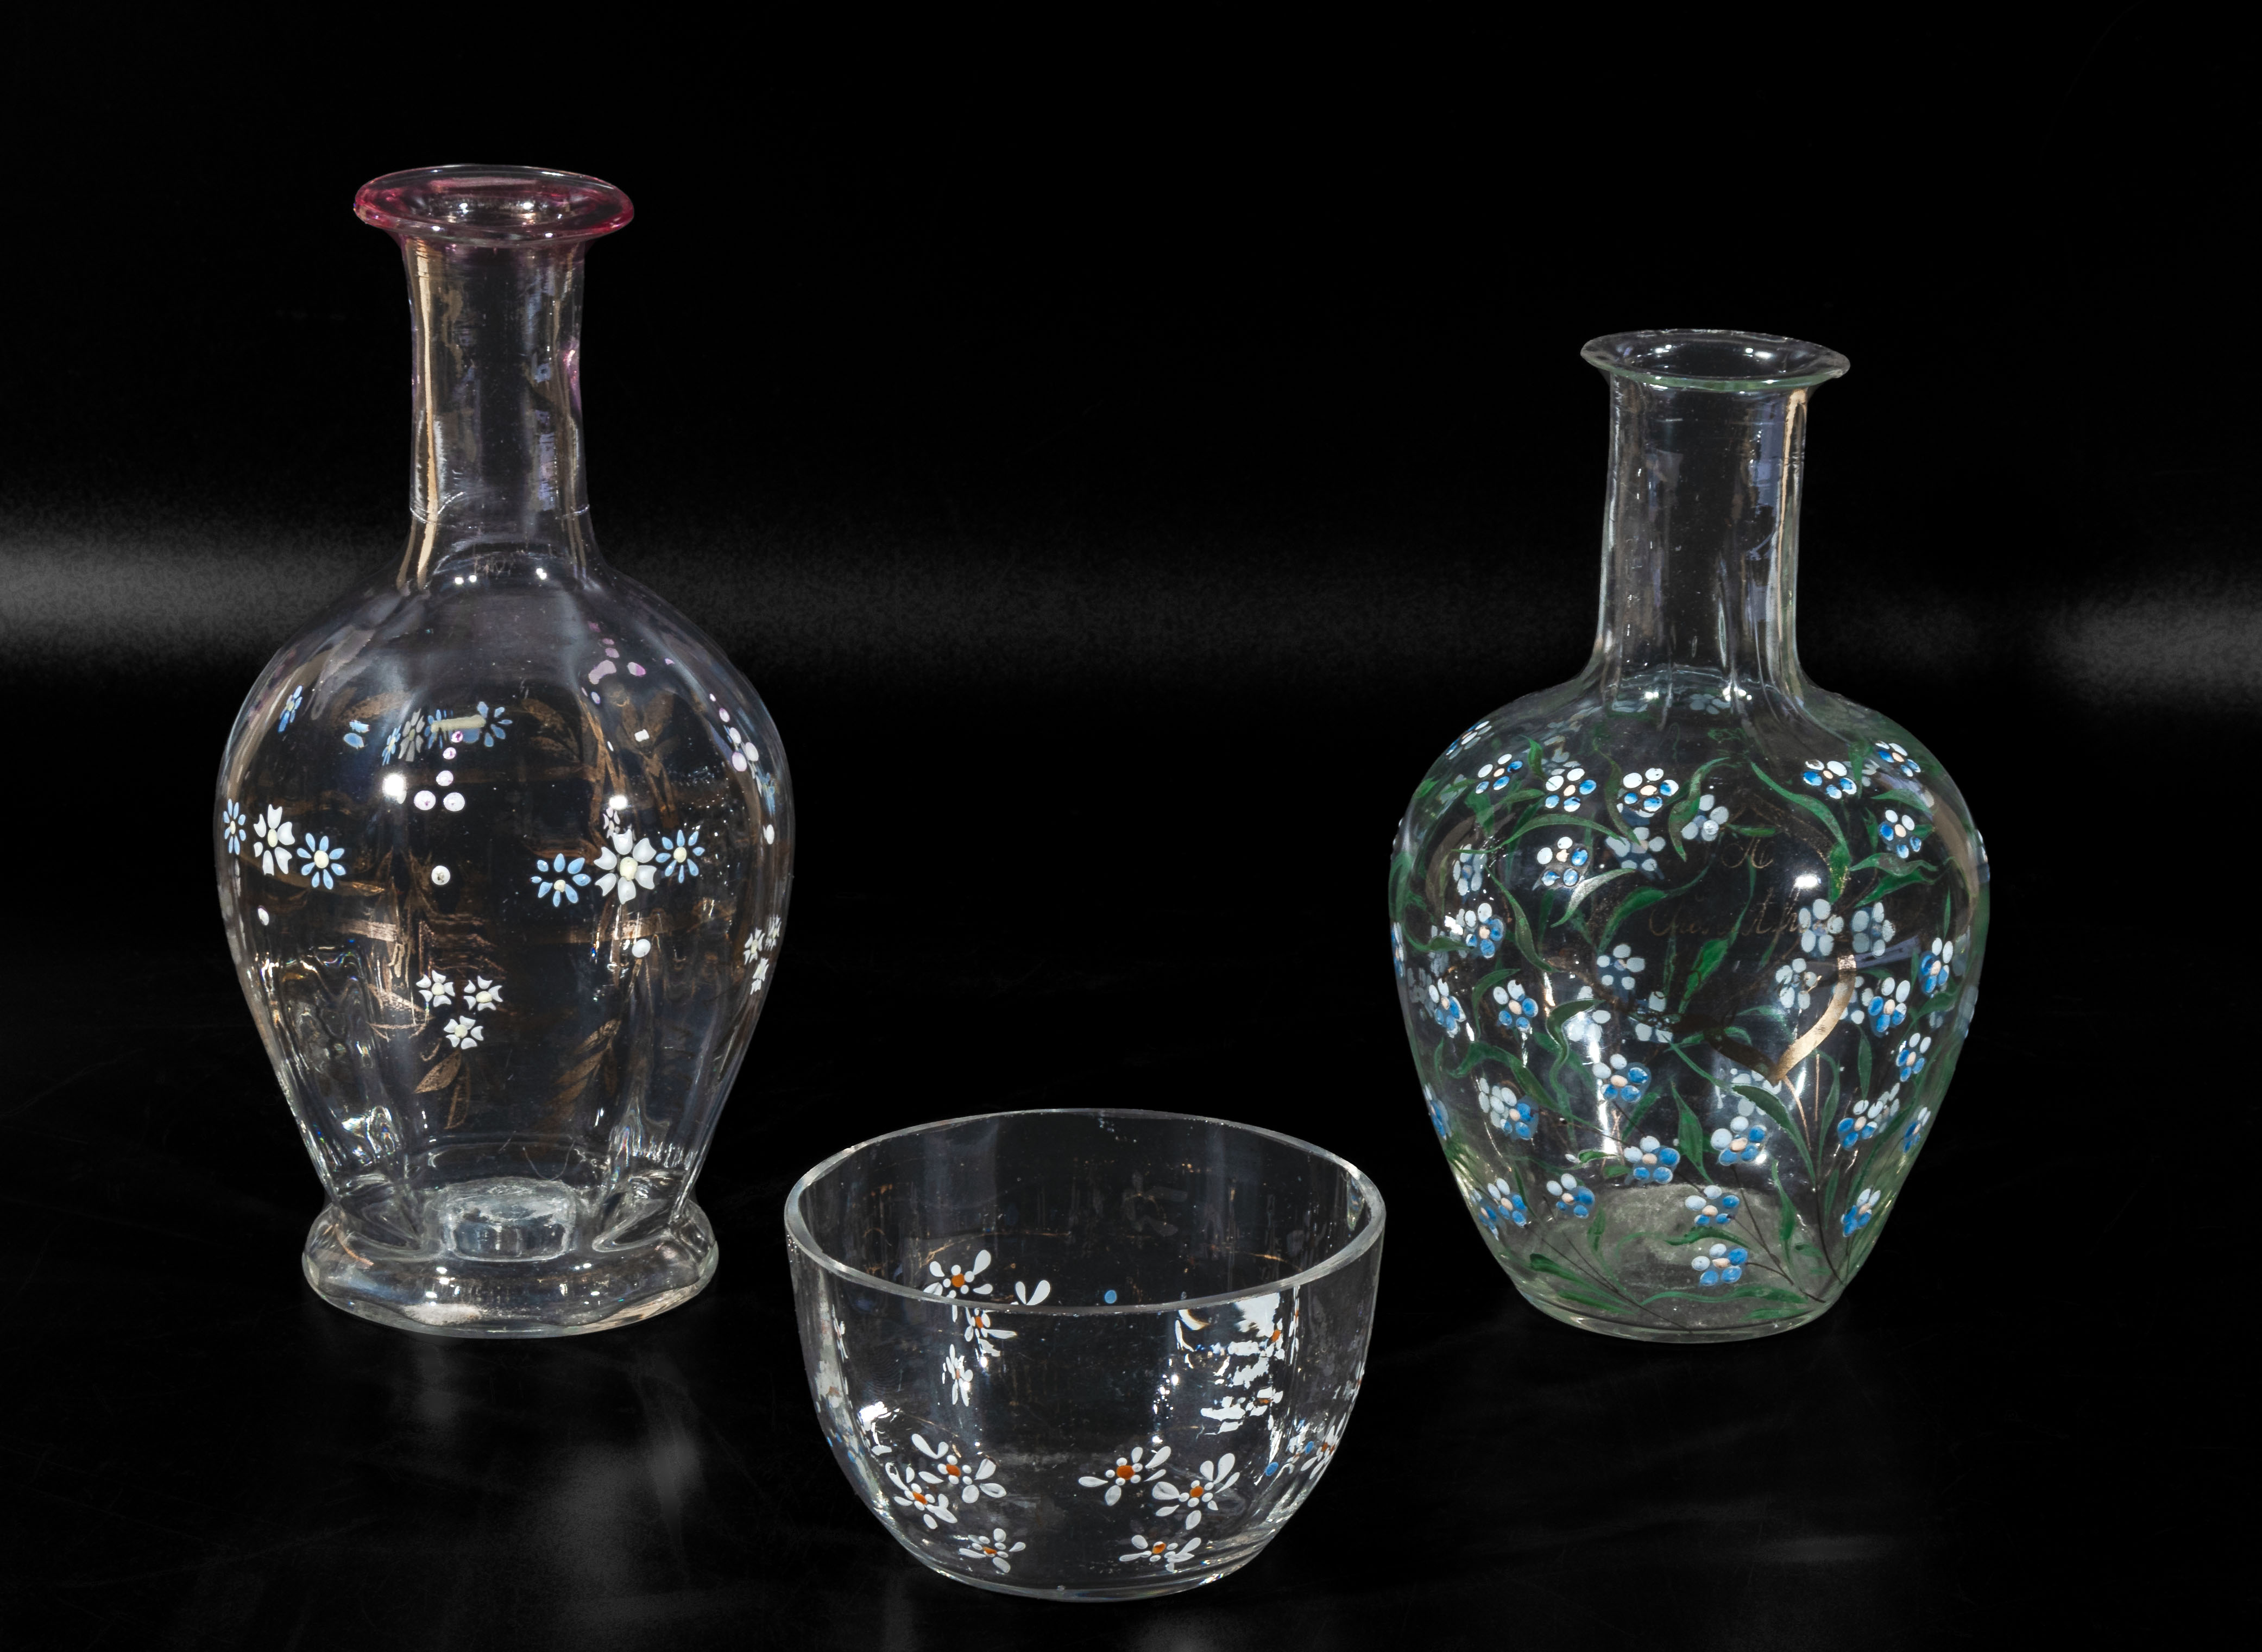 Two decorated glass carafes and a bowl